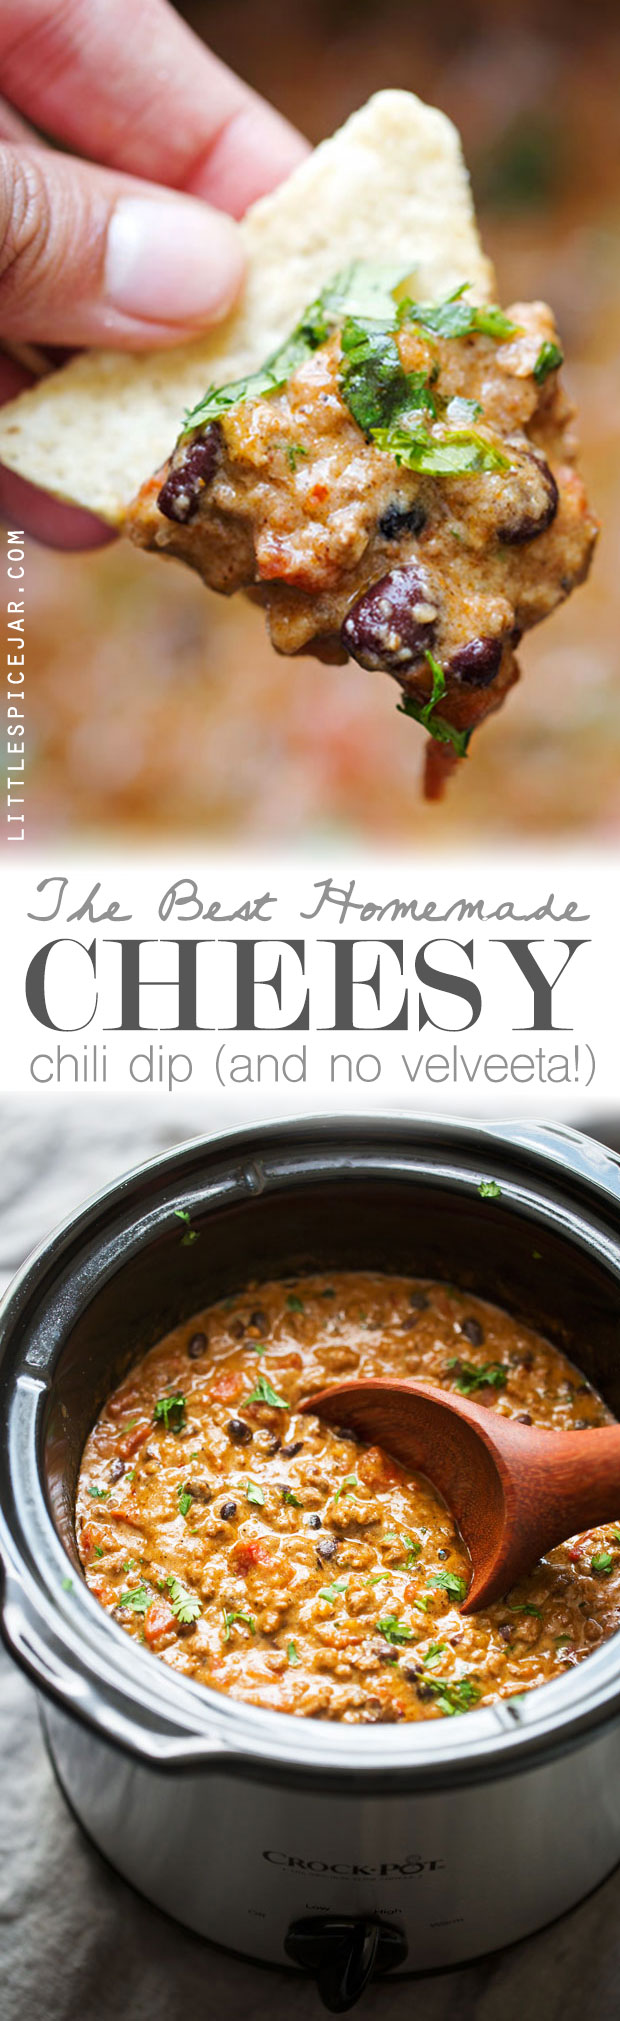 The BEST Cheesy Chili Dip - made with a homemade taco seasoning and NO Velveeta - just simple homemade cheese sauce! So good! #chilicheesedip #cheesychilidip #chilidip | Littlespicejar.com